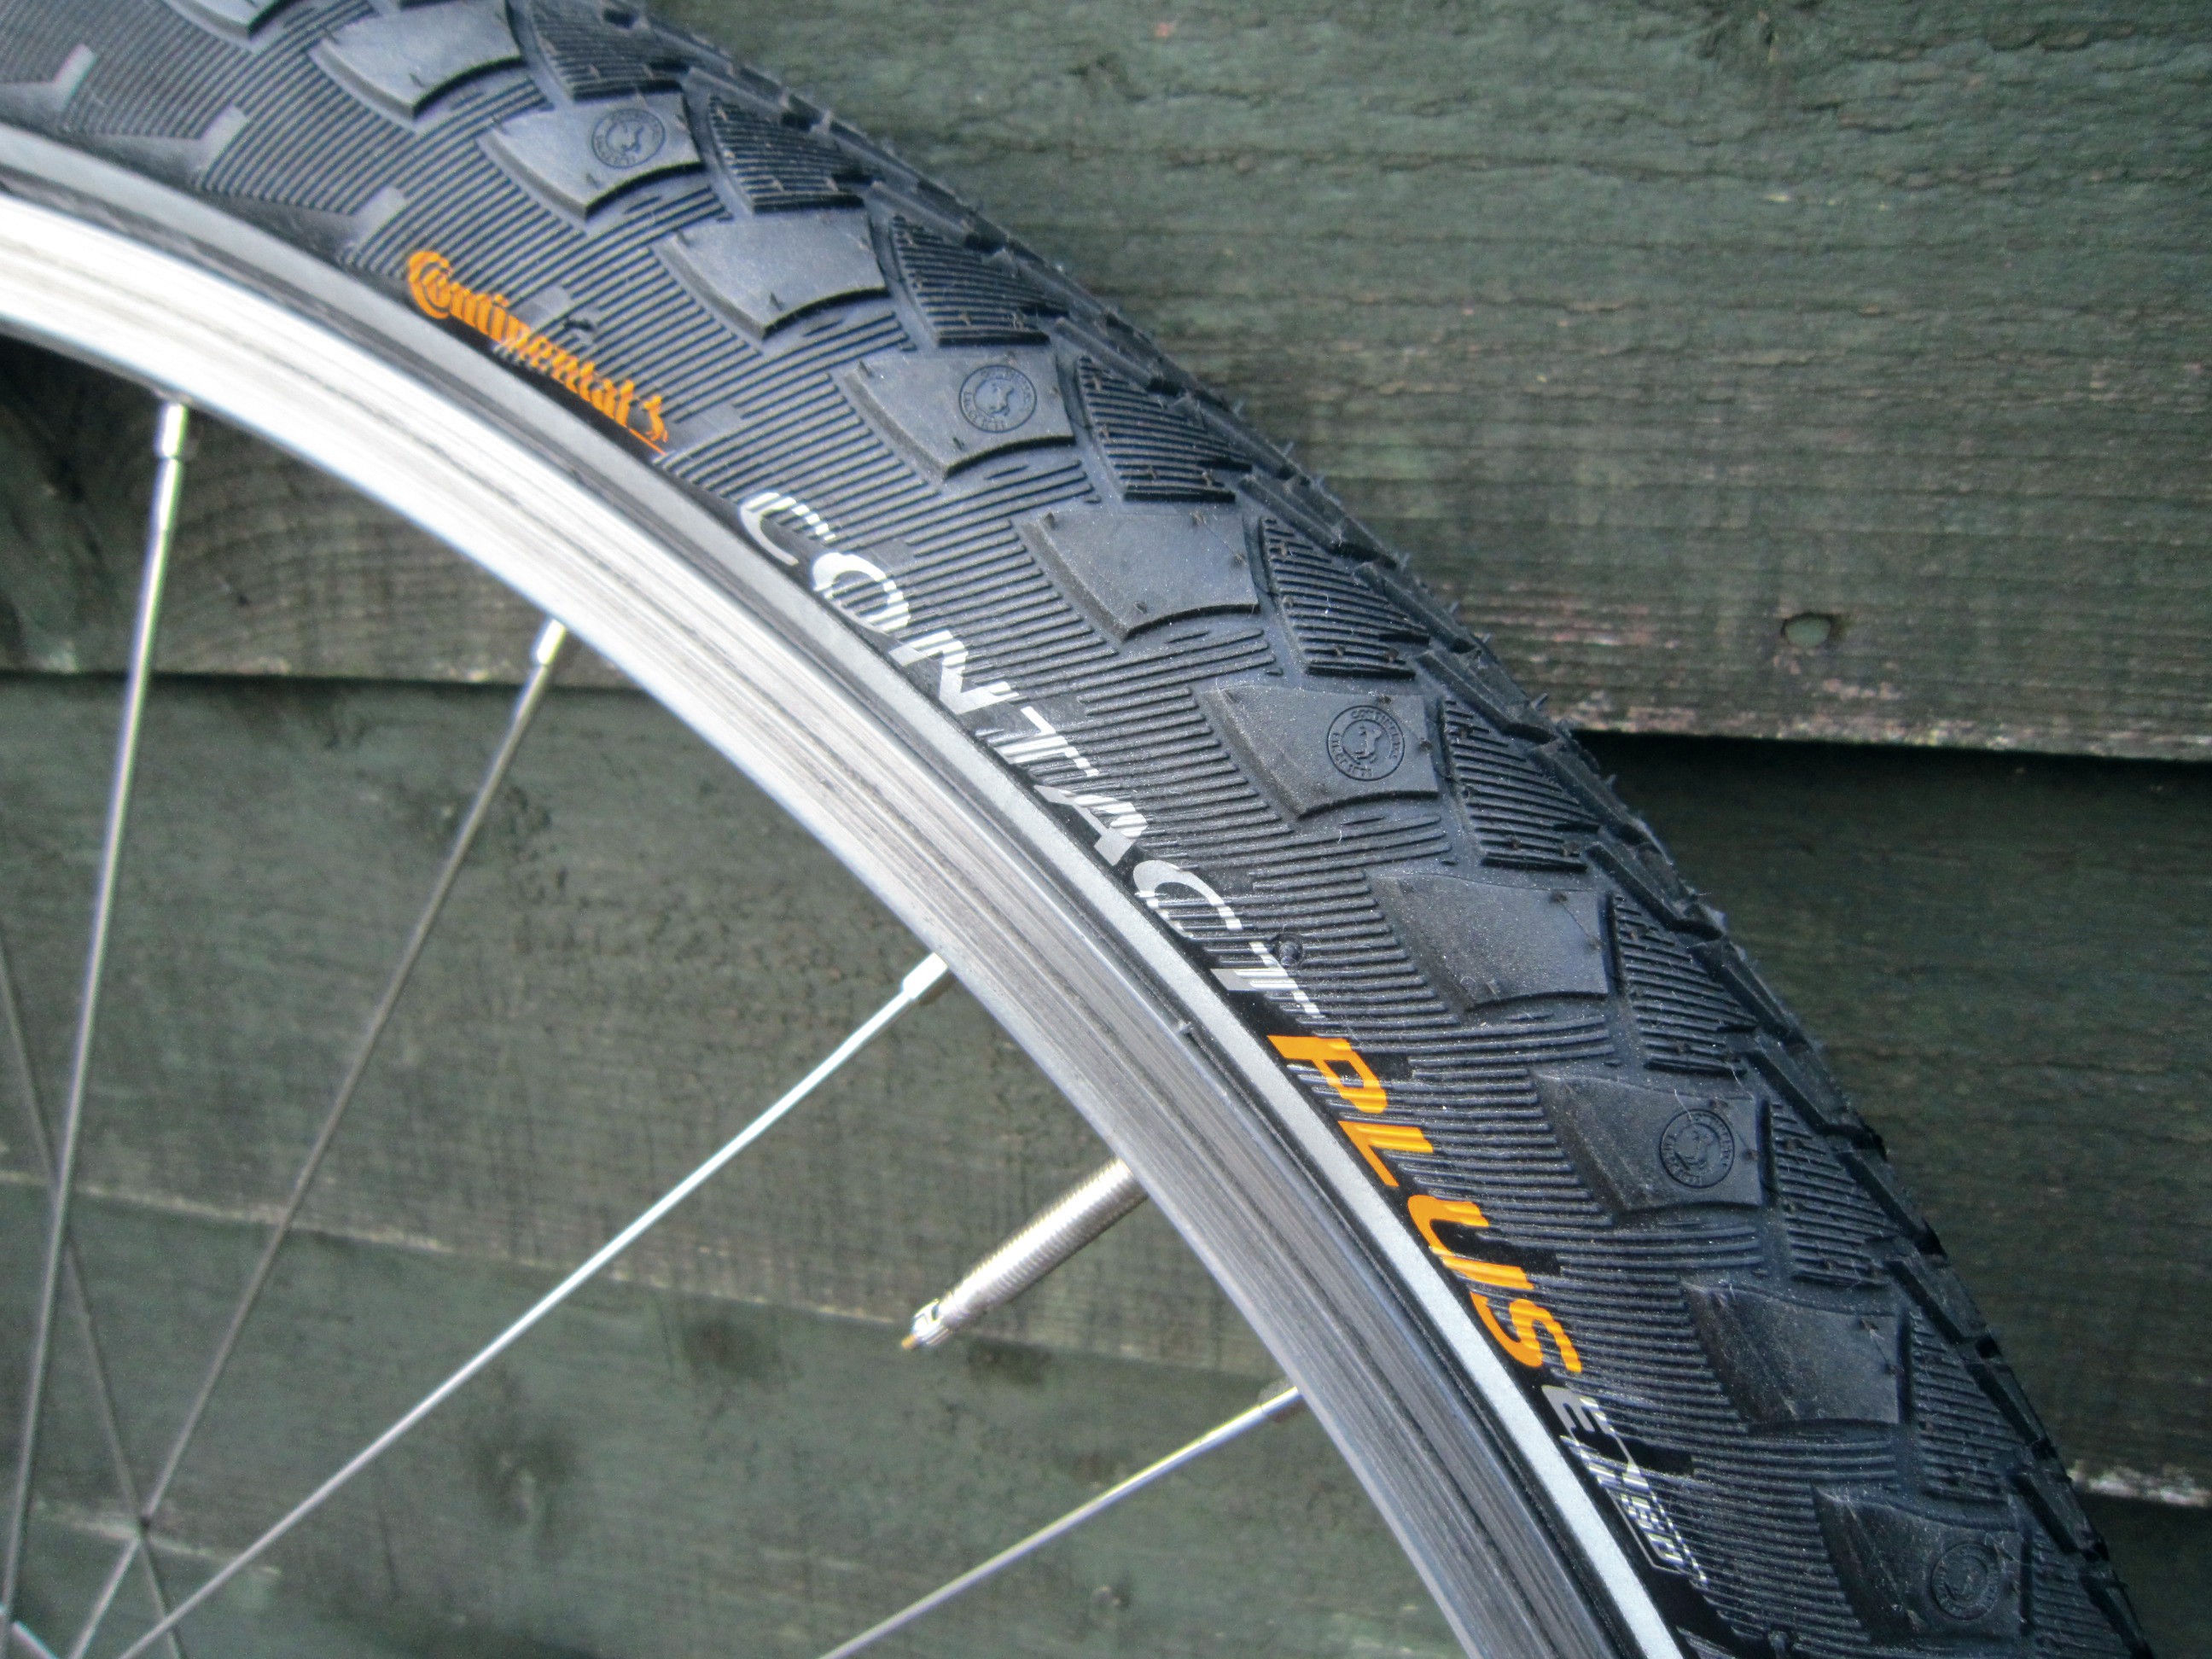 continental contact speed folding city tyre